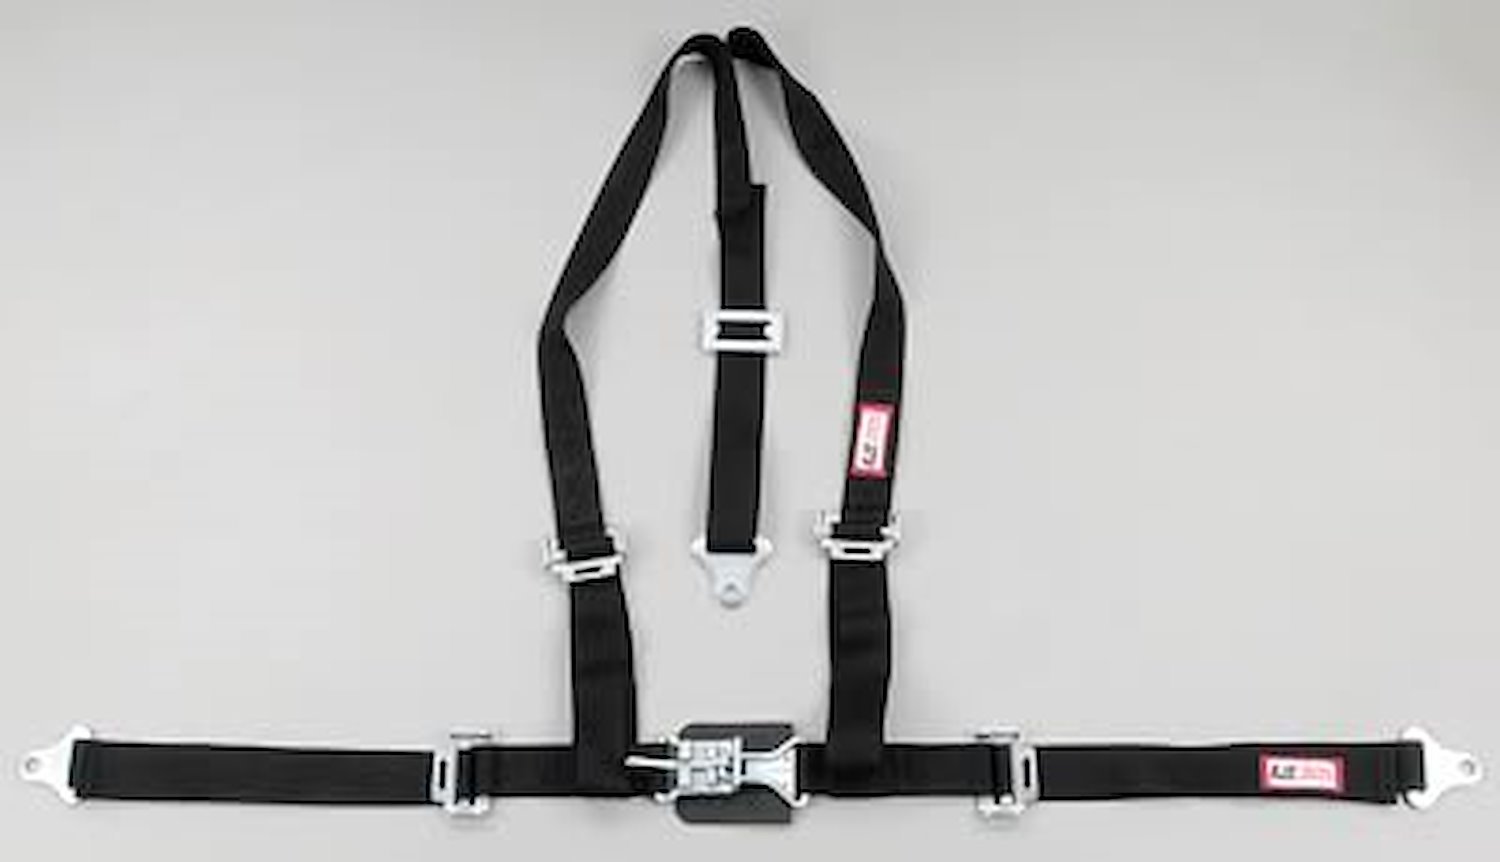 NON-SFI L&L HARNESS 3 PULL DOWN Lap Belt SNAP SEWN IN 2 S.H. Individual FLOOR Mount w/STERNUM STRAP WRAP/SNAP YELLOW